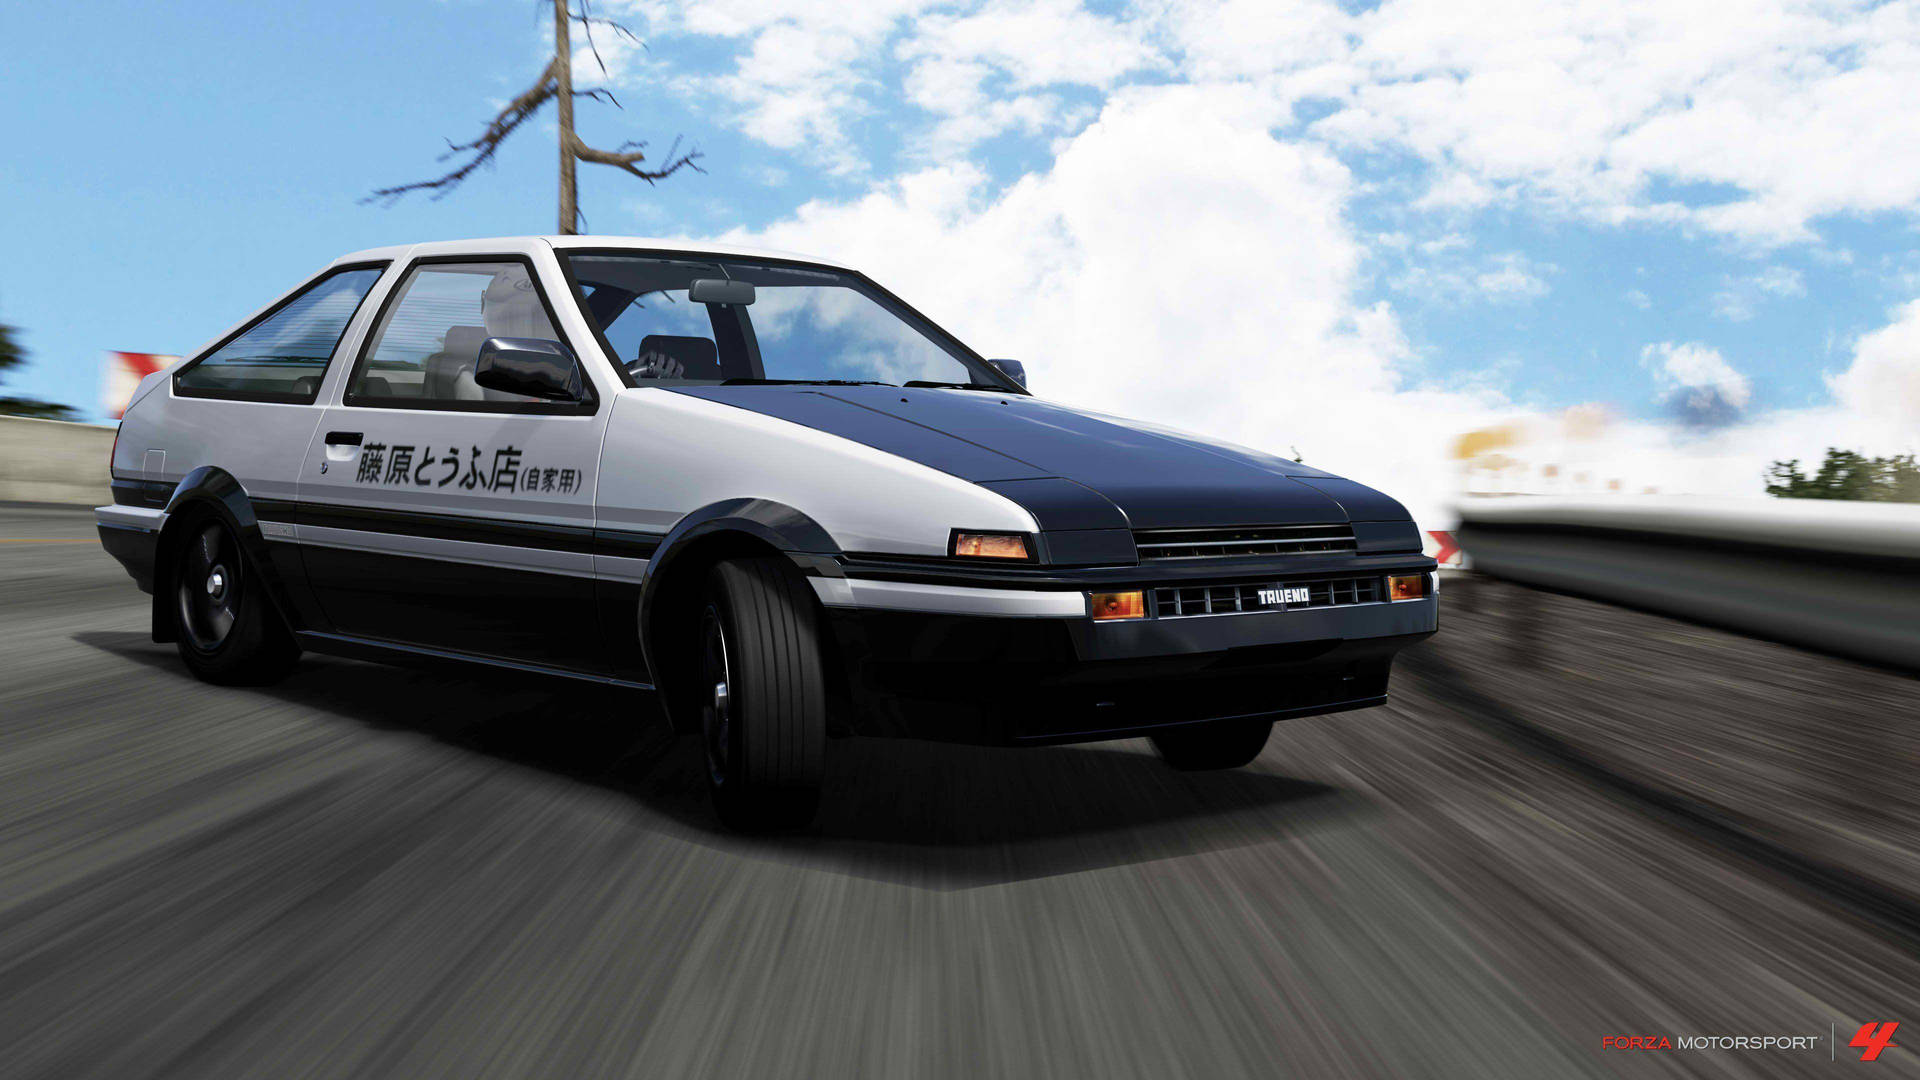 3840X2160 Initial D Wallpaper and Background